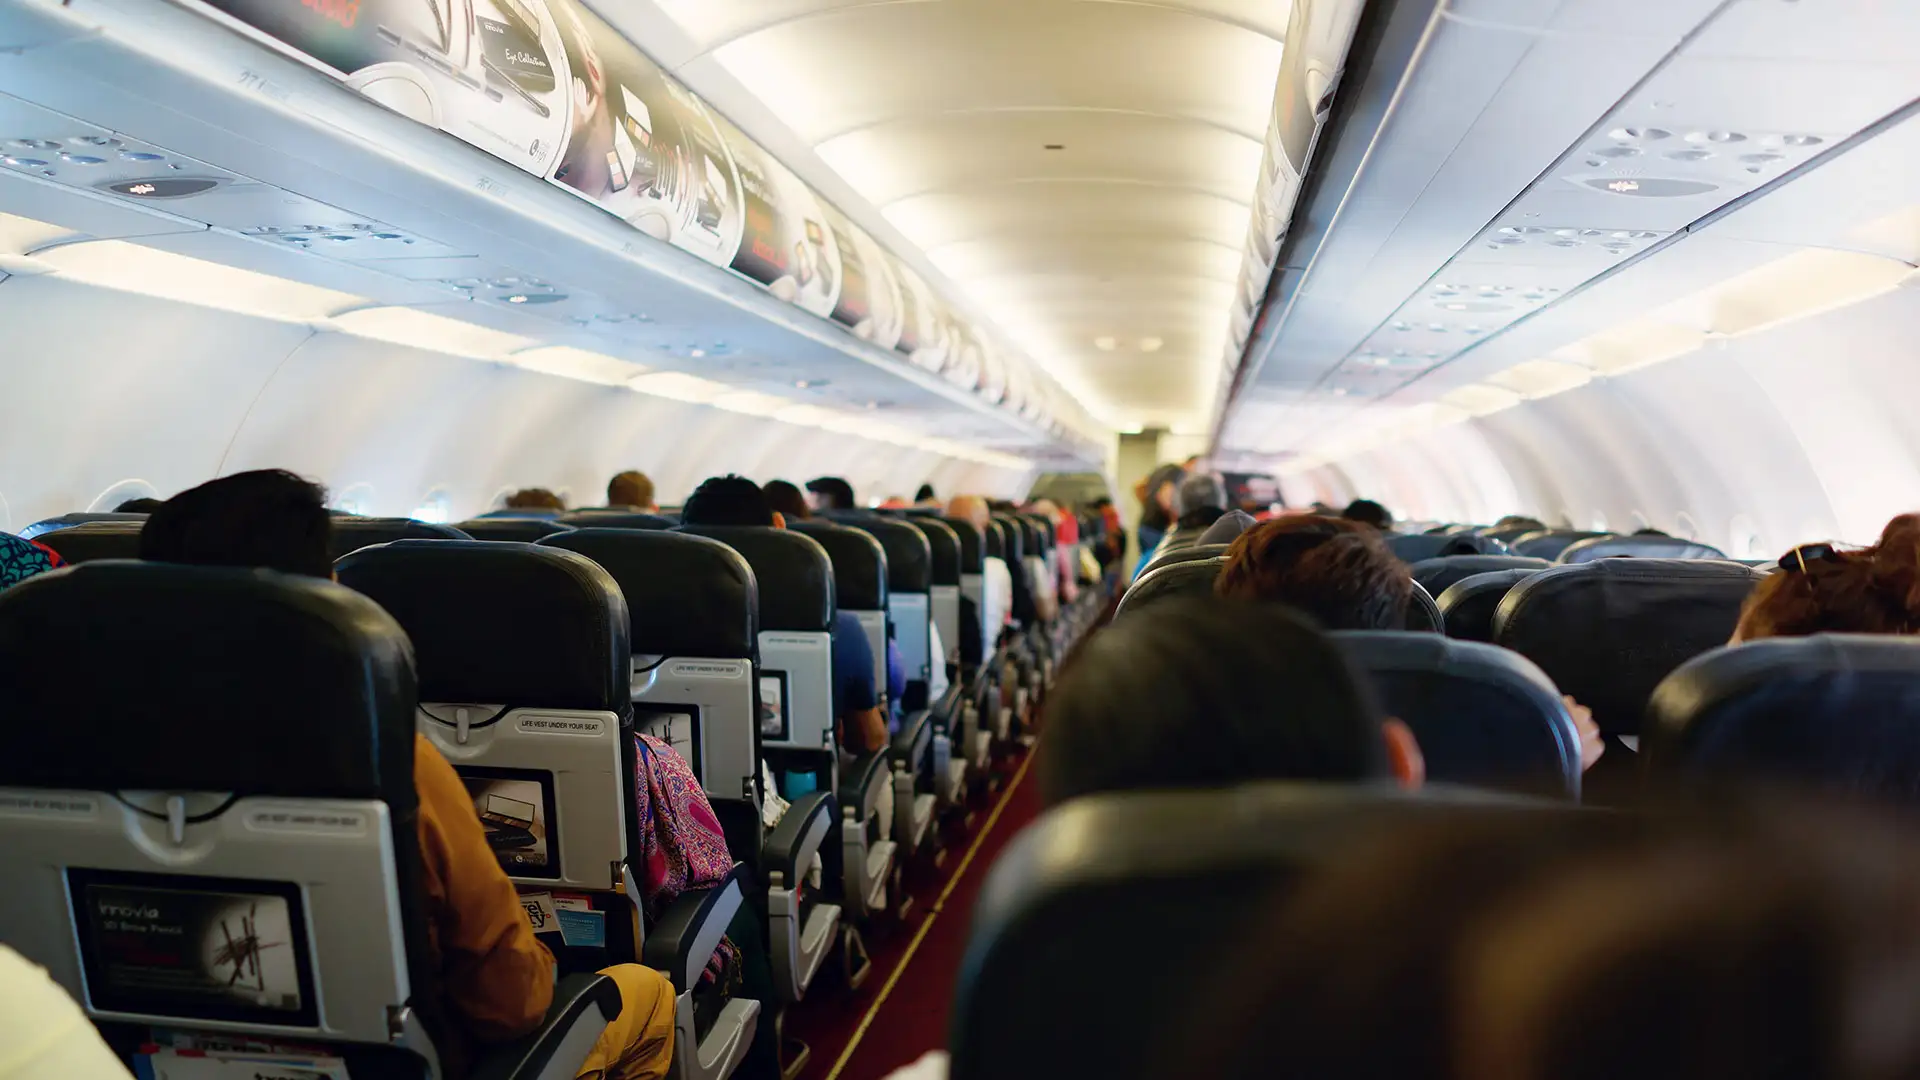 Why You Have to Put Your Seat Upright During Takeoff and Landing